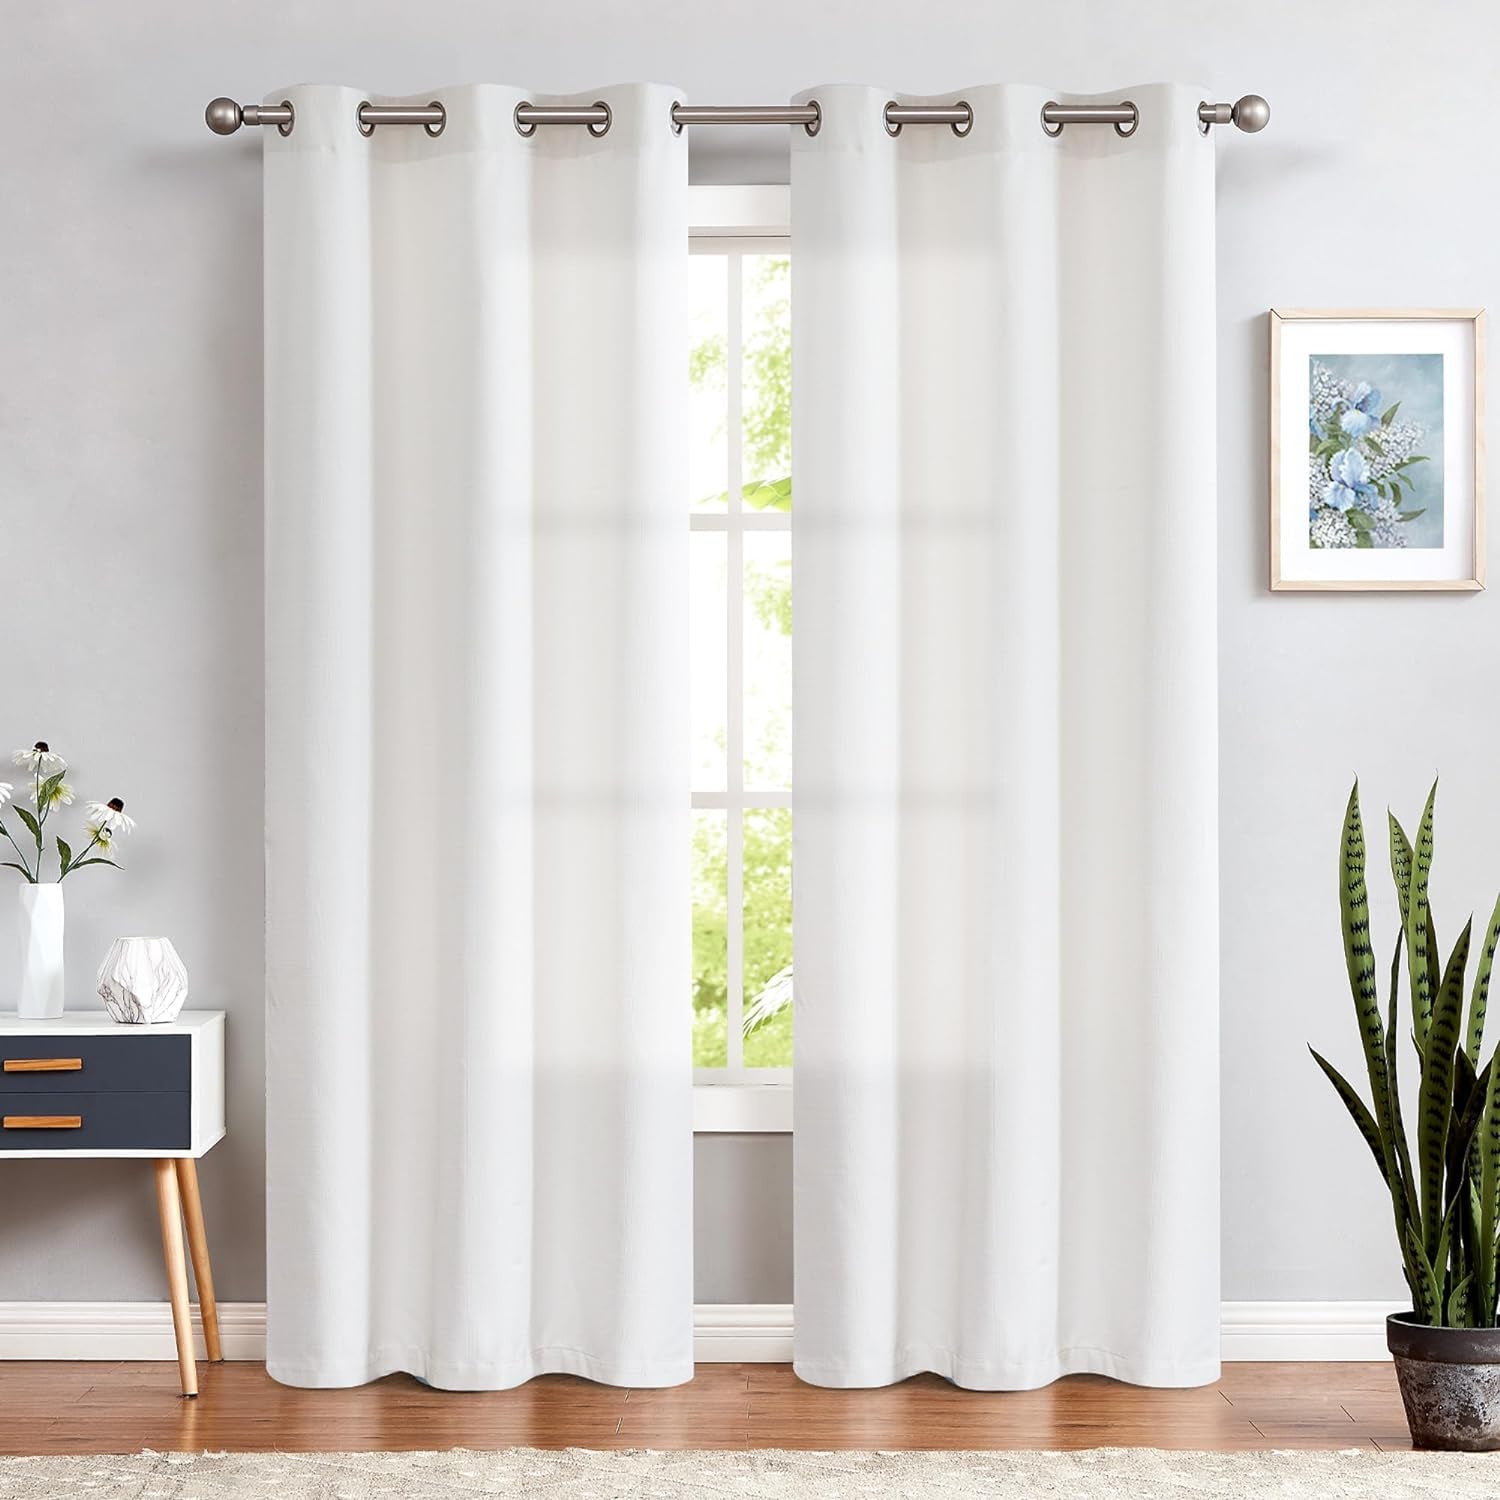 COLLACT White Linen Textured Curtains 84 Inch Length 2 Panels for Living Room Casual Weave Light Filtering Semi Sheer Curtains & Drapes for Bedroom Grommet Top Window Treatments, W38 X L84, White  COLLACT   